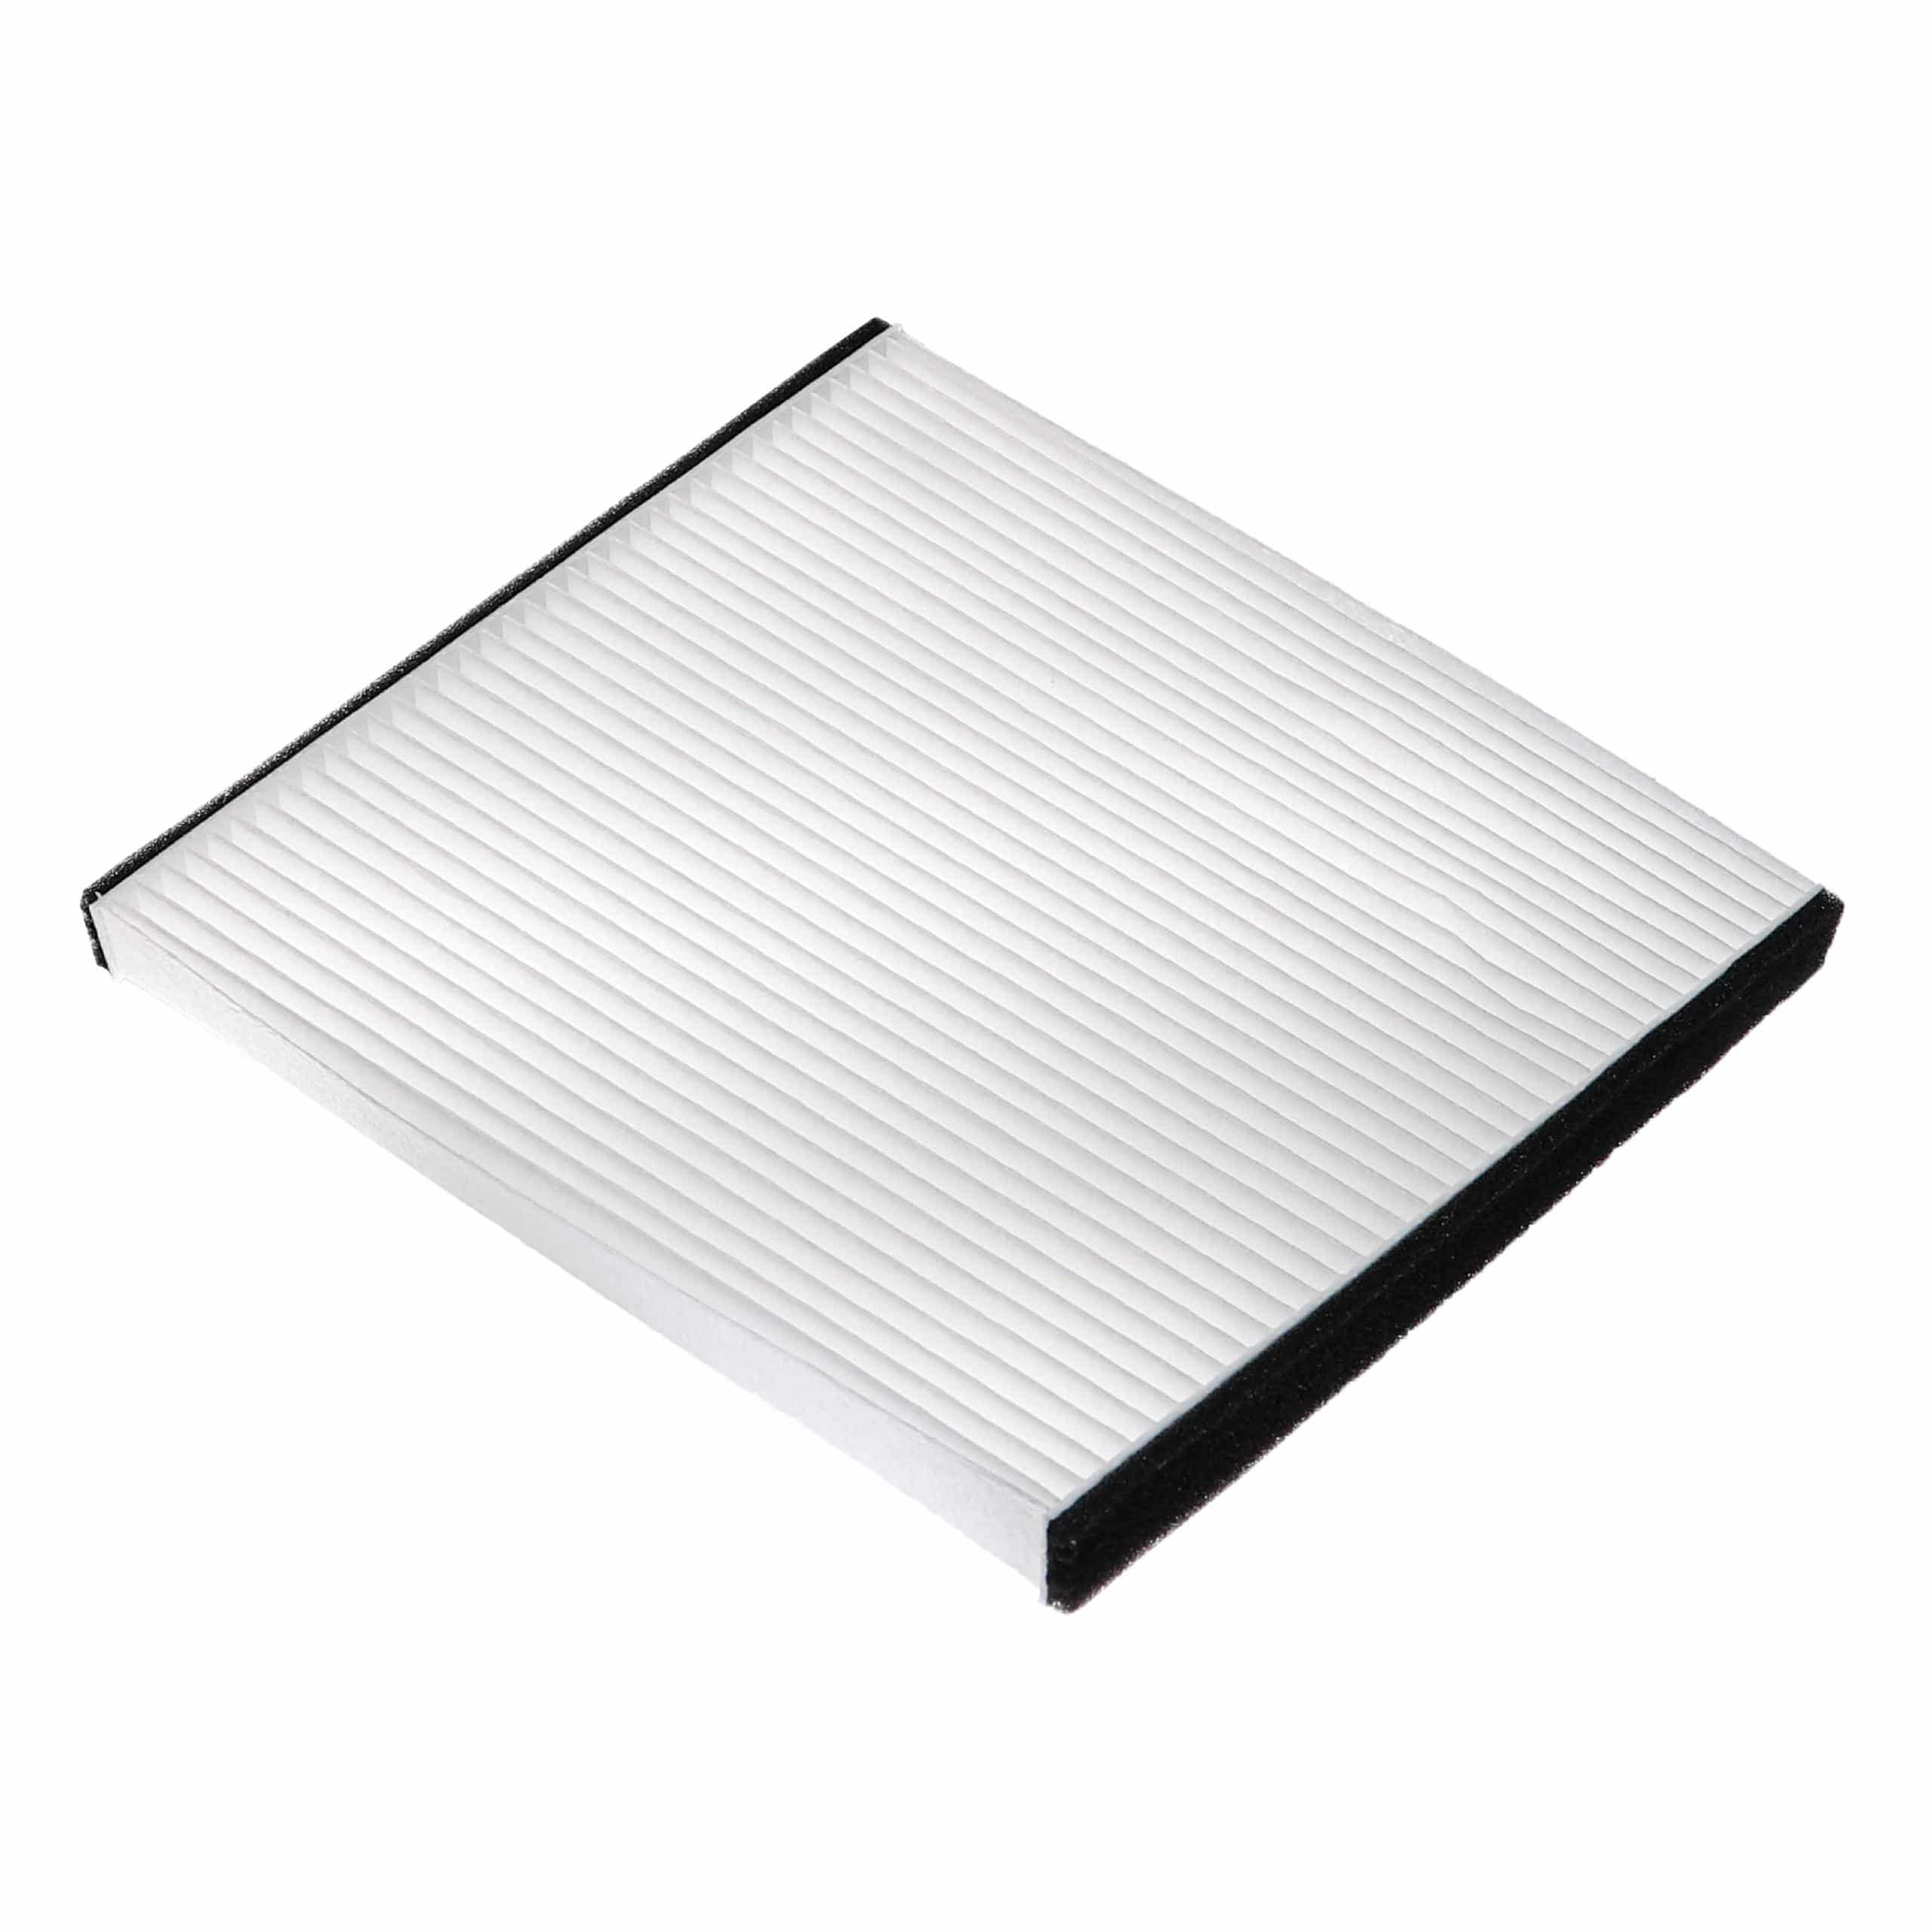 Cabin Air Filter replaces Bosch 1 987 432 263 etc.